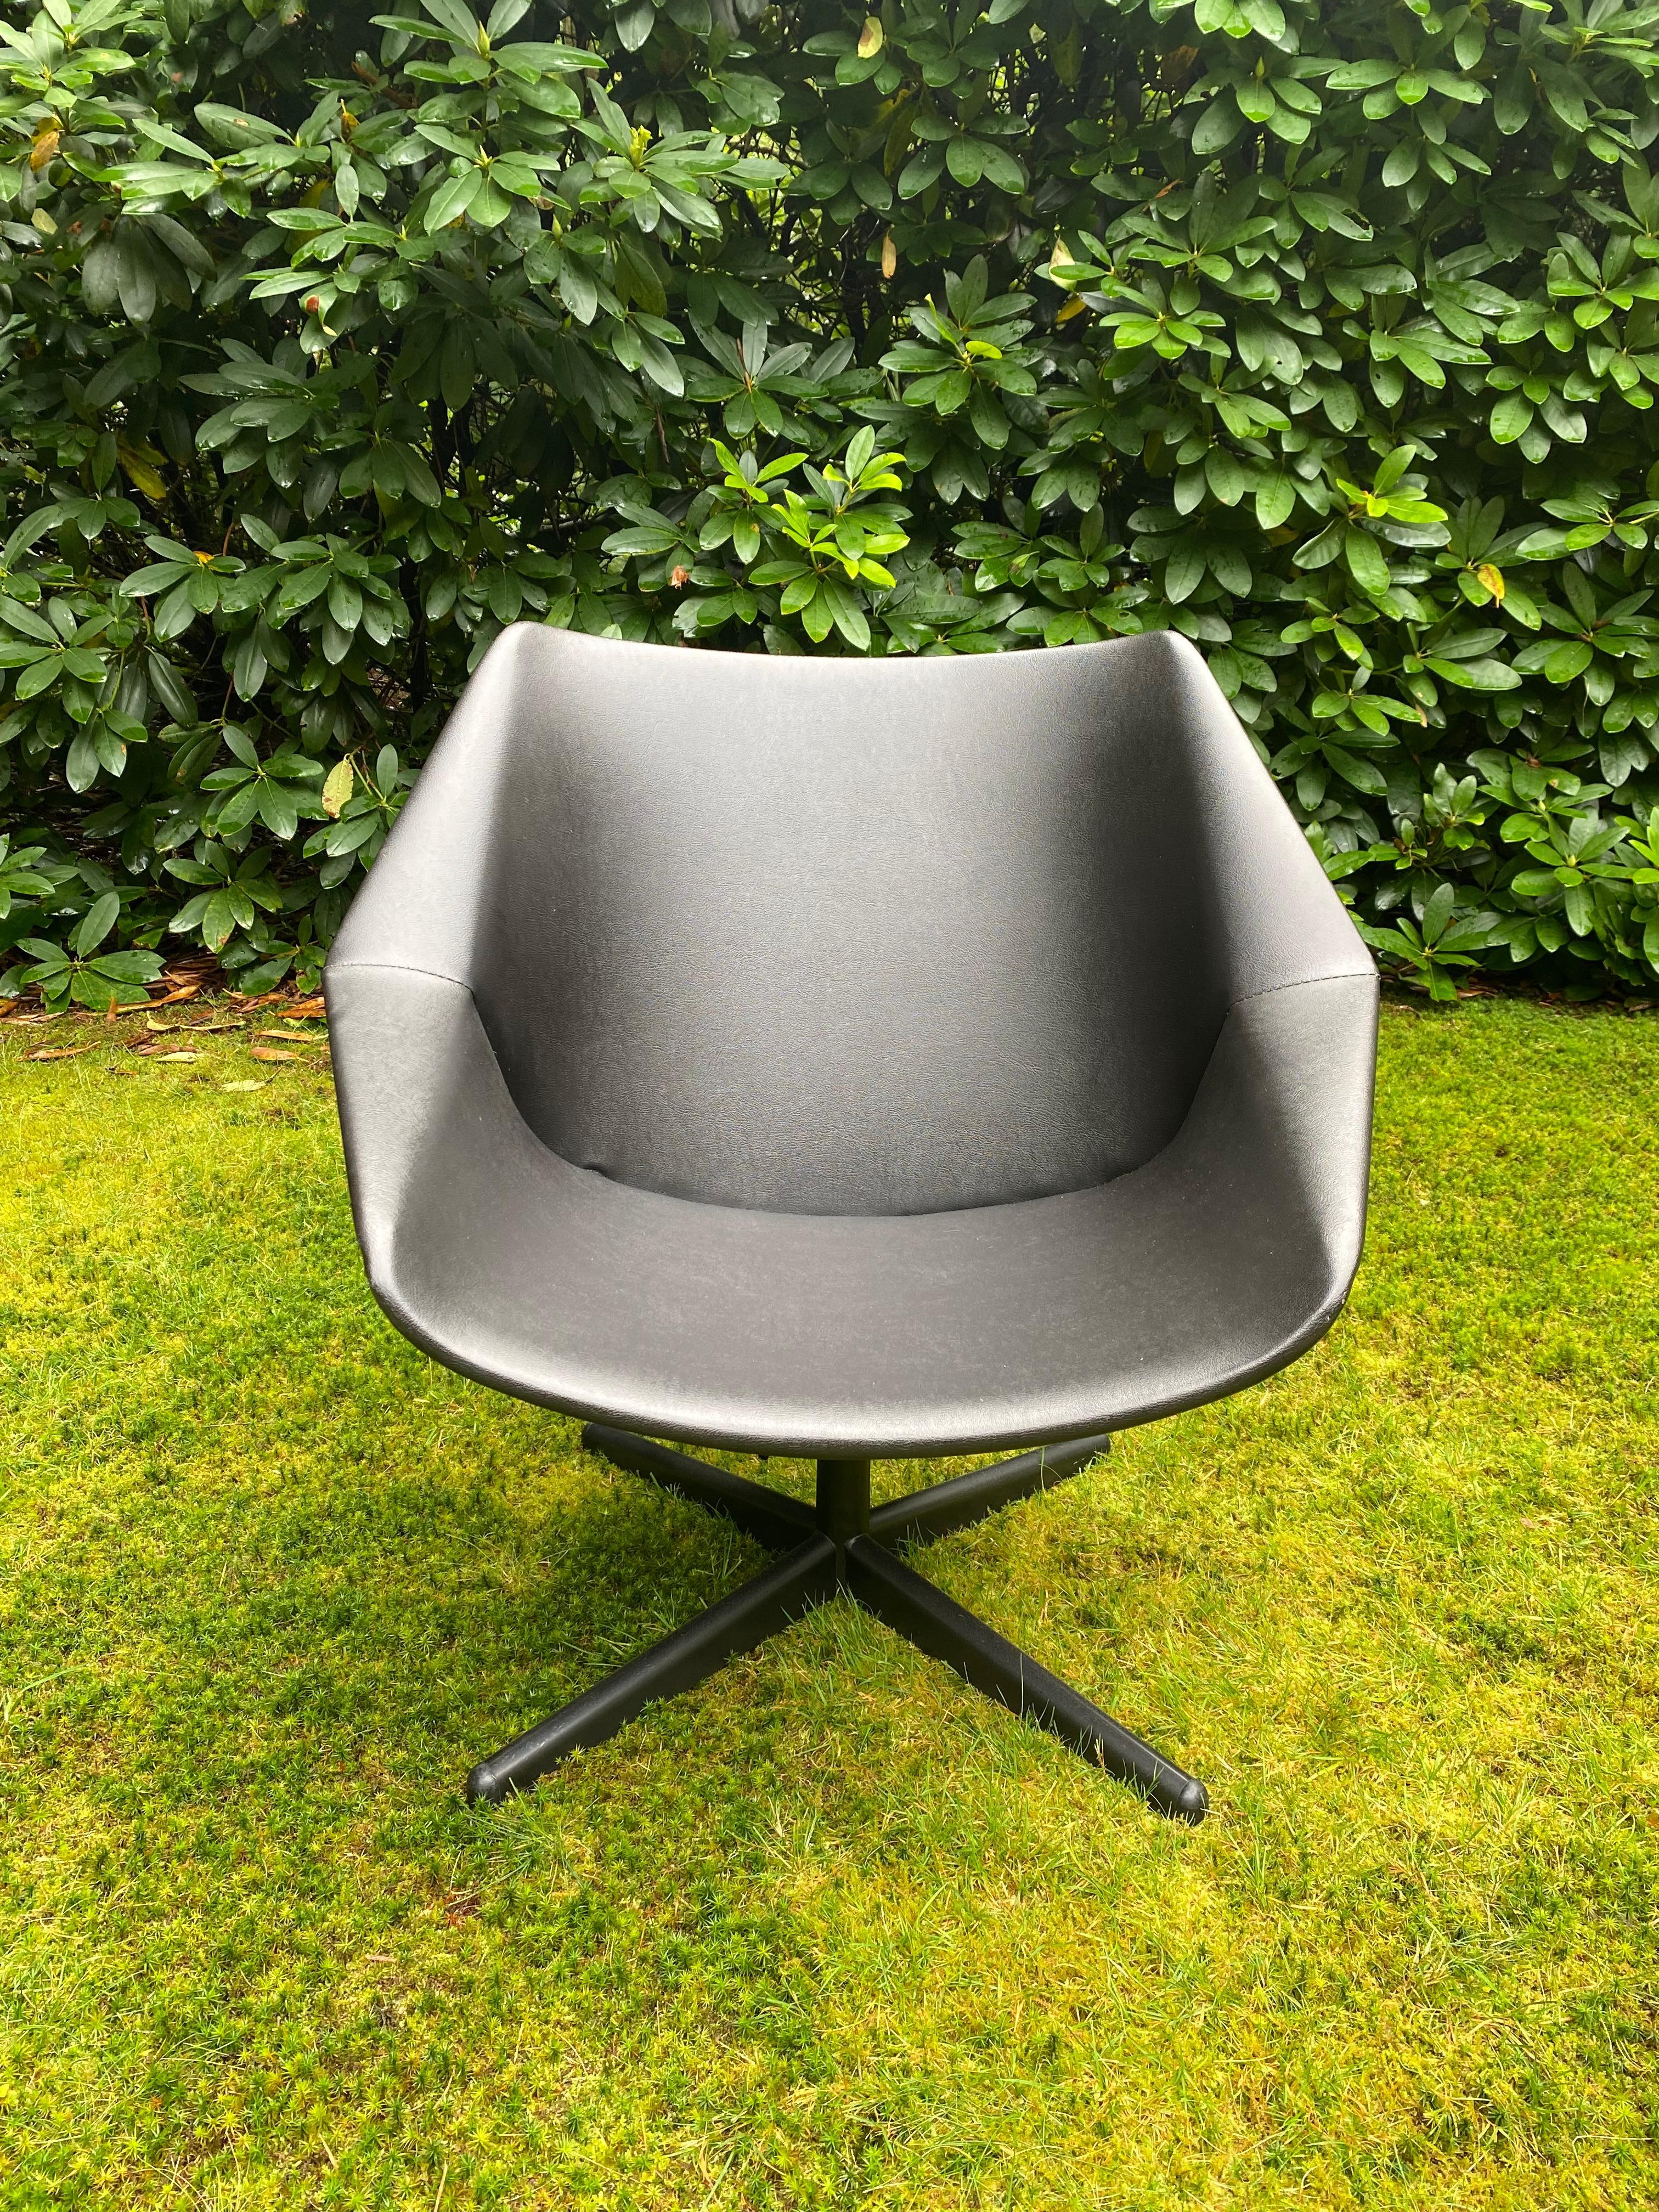 Black swivel chair on a four star metal base, was designed by Cees Braakman for Pastoe in The early 1960s. This model, FM08, features à black faux Leatherette upholstery. It’s maximum height is 72cm. This chair remming in good condition with Some